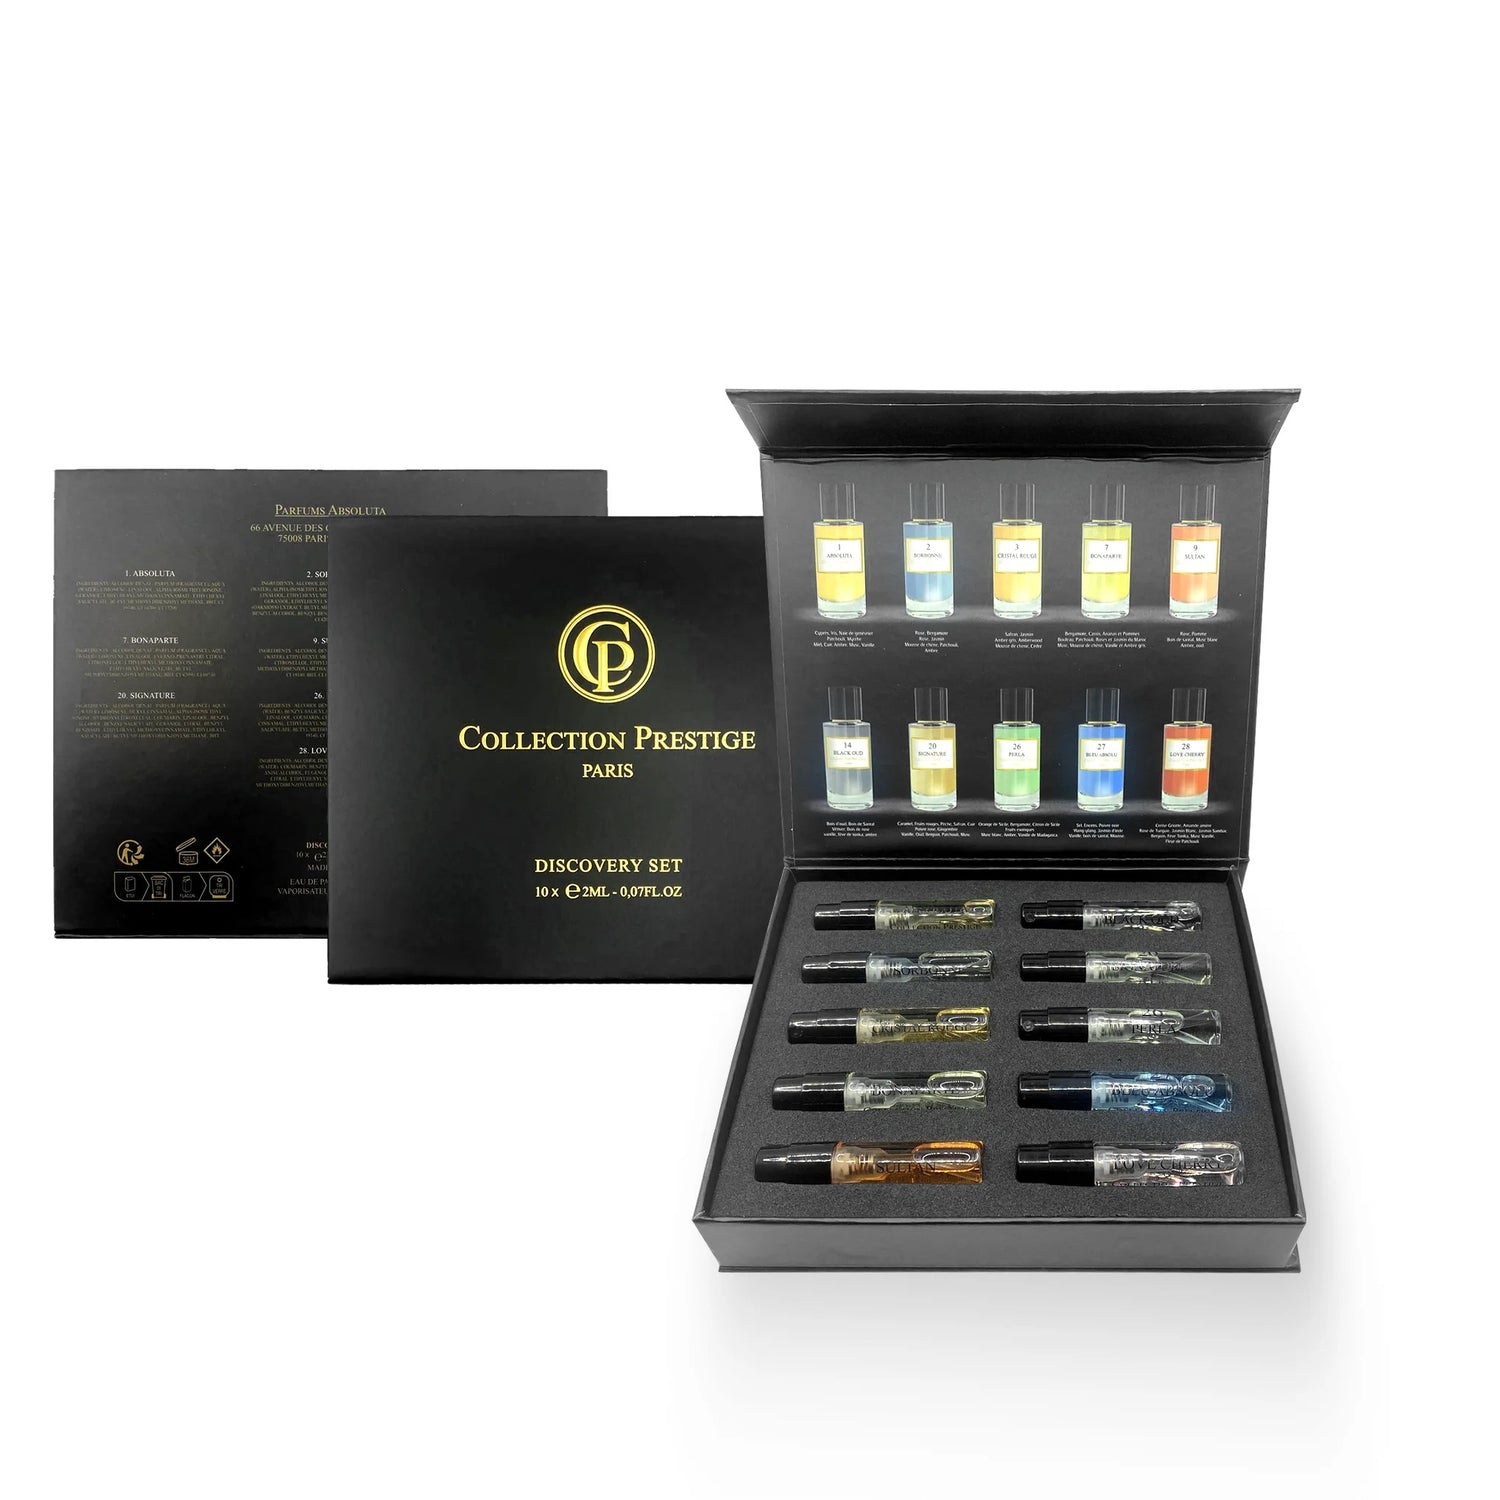 Collection Prestige Discovery Set Samples Tester Coffret 